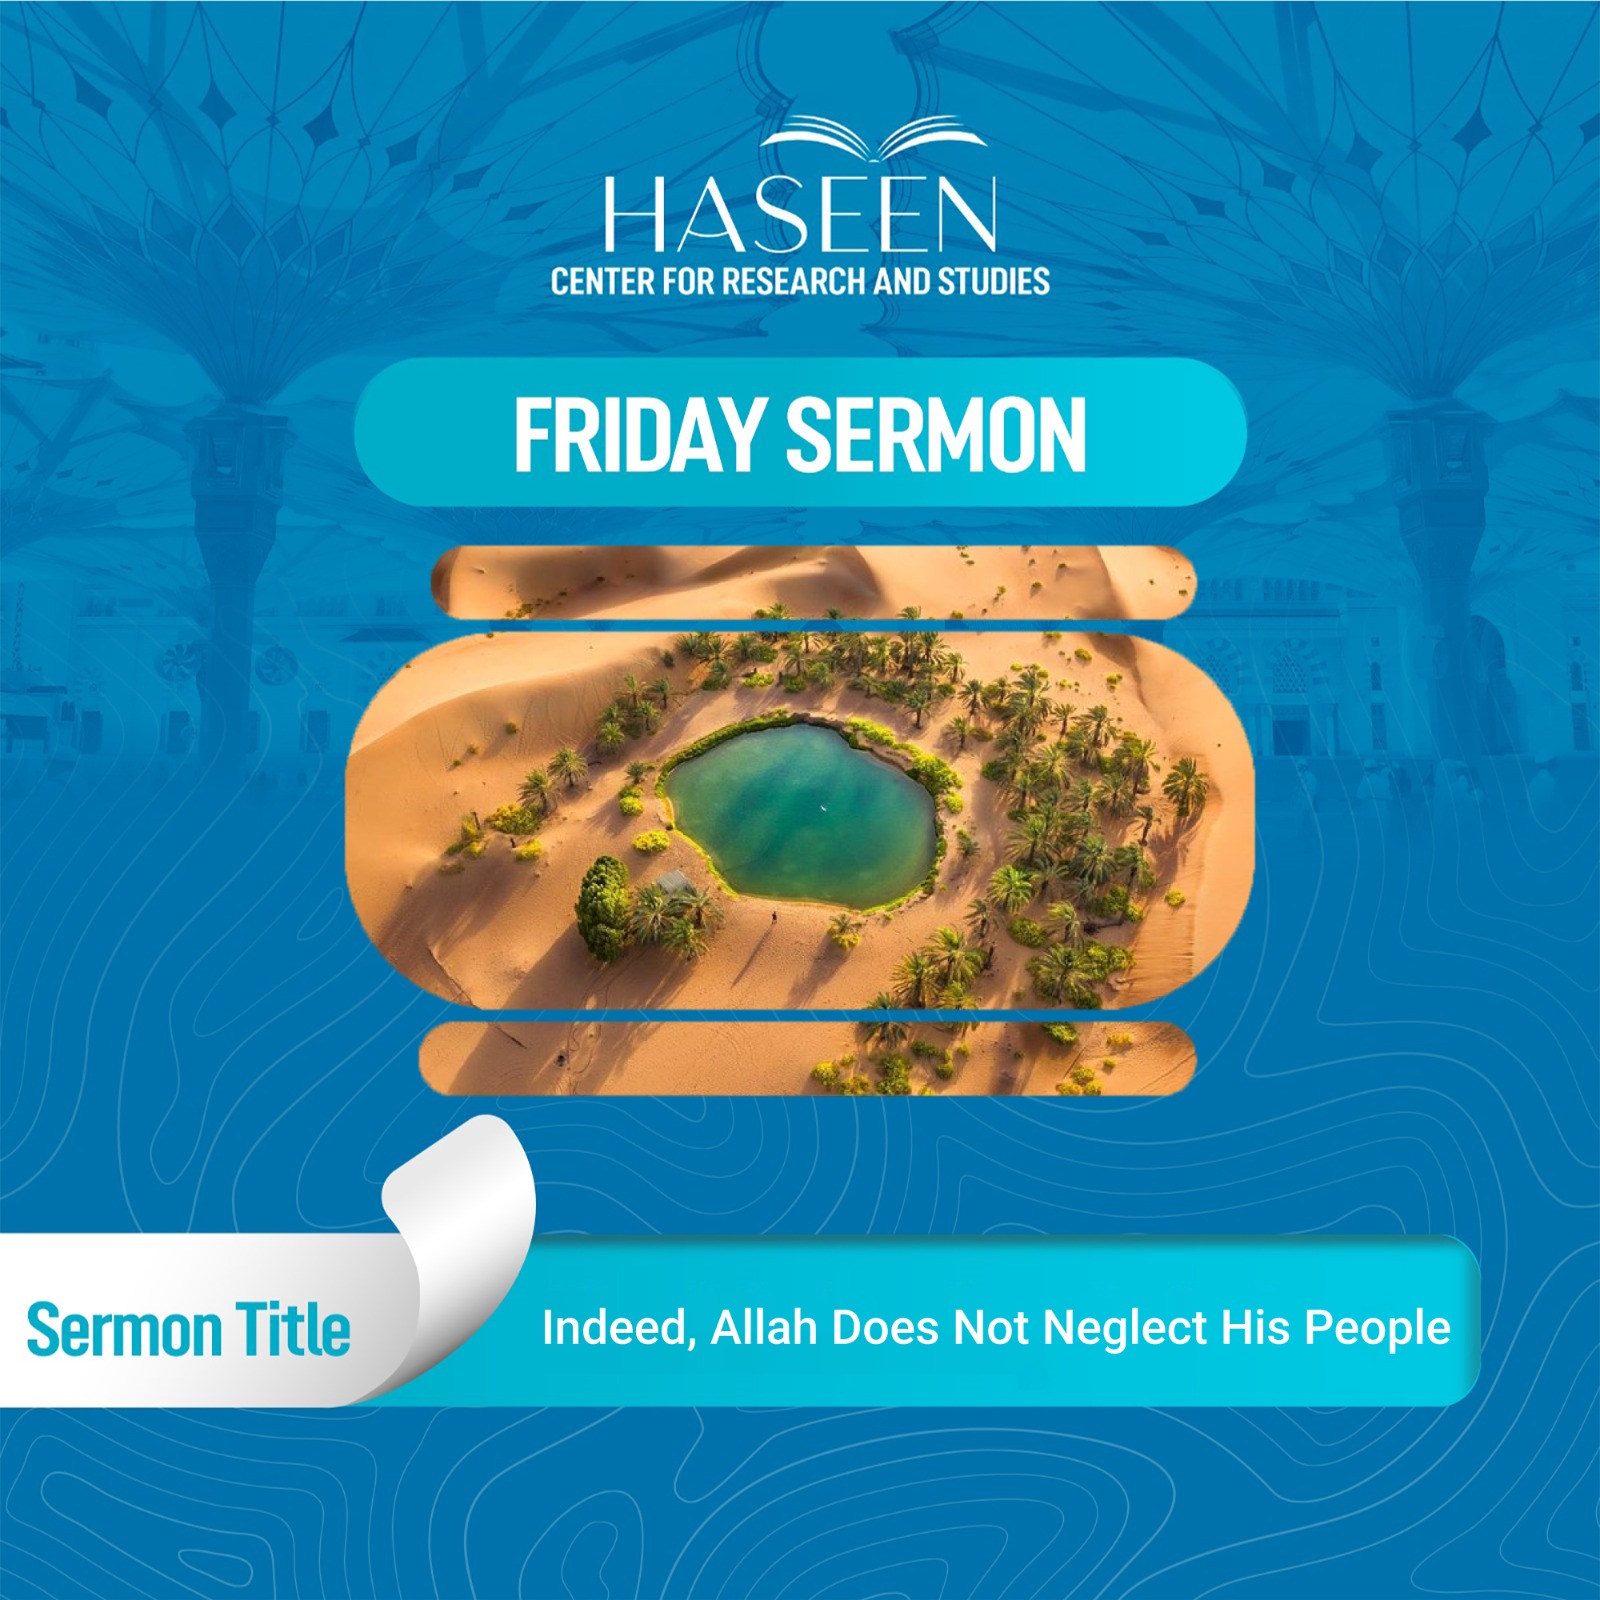 Title of the Sermon: Indeed, Allah Does Not Neglect His People